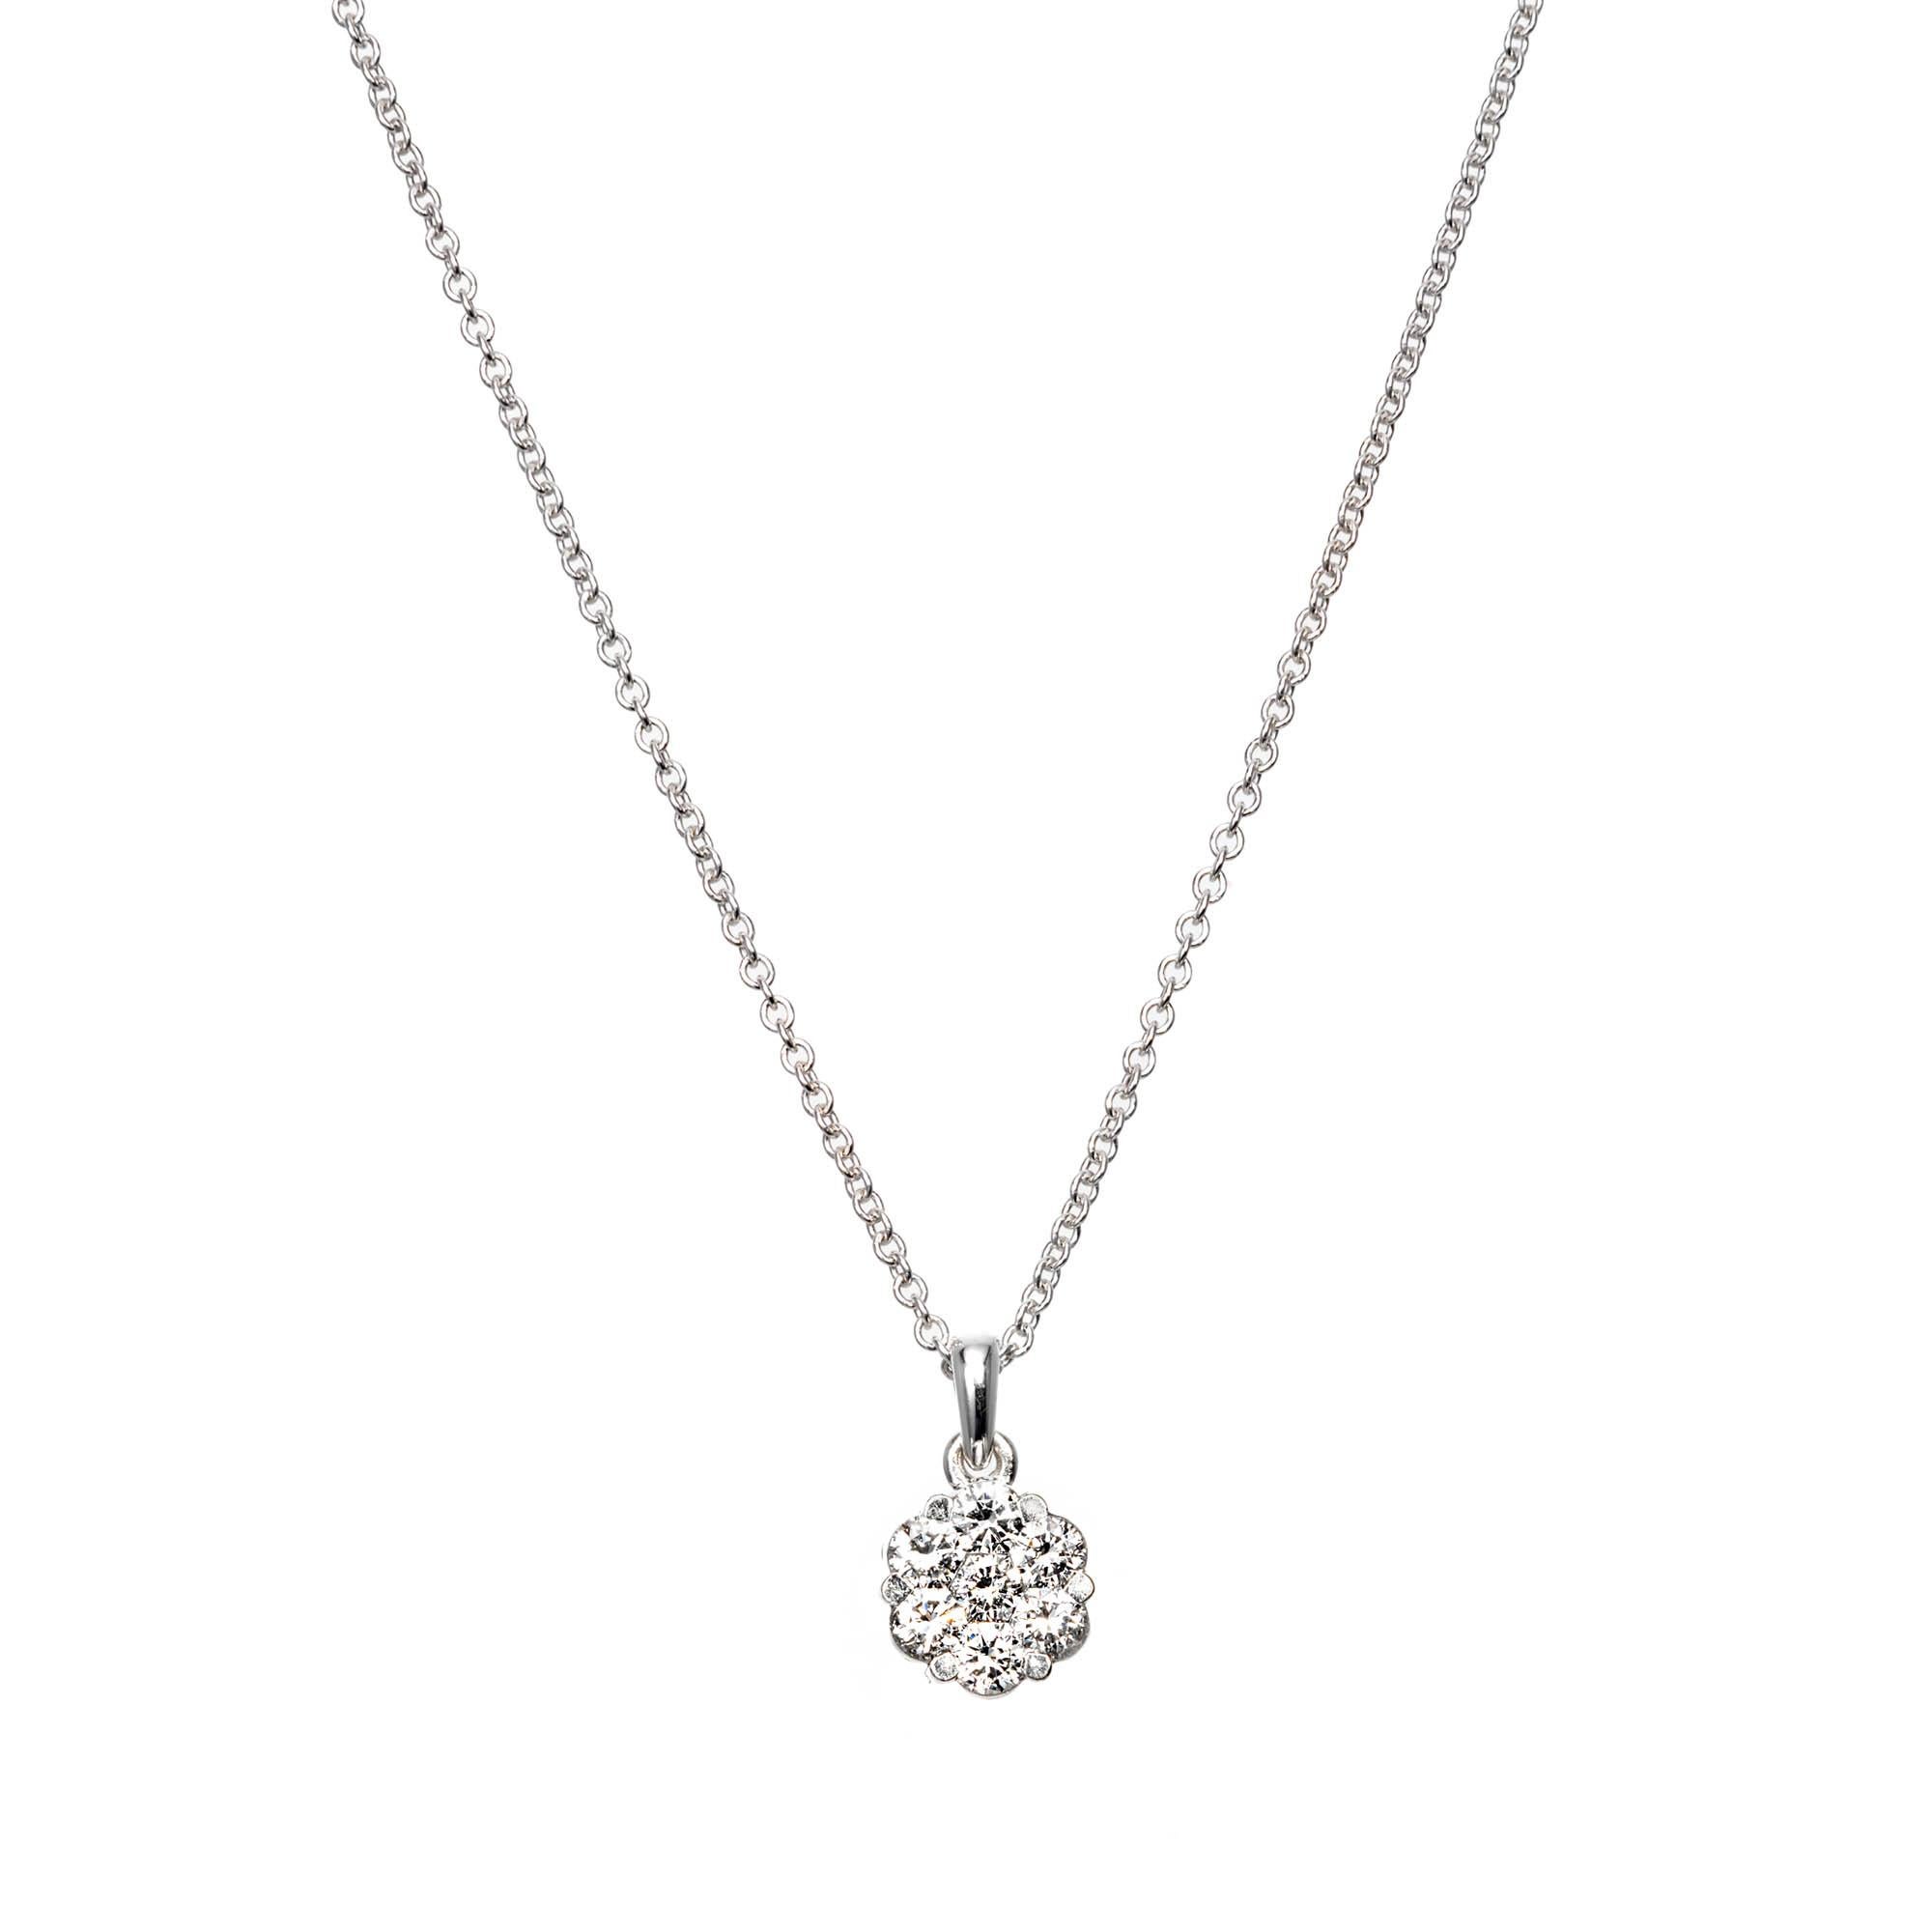 Diamond cluster pendant necklace, set in 18k white gold with .60 carats of round brilliant cut diamonds 

7 round brilliant cut G-H SI diamonds, Approx. .60 carats 
18k White Gold 
Stamped: 18k
3.4 Grams
Top to Bottom: 7.6mm or .30 Inches
Width: 7.8